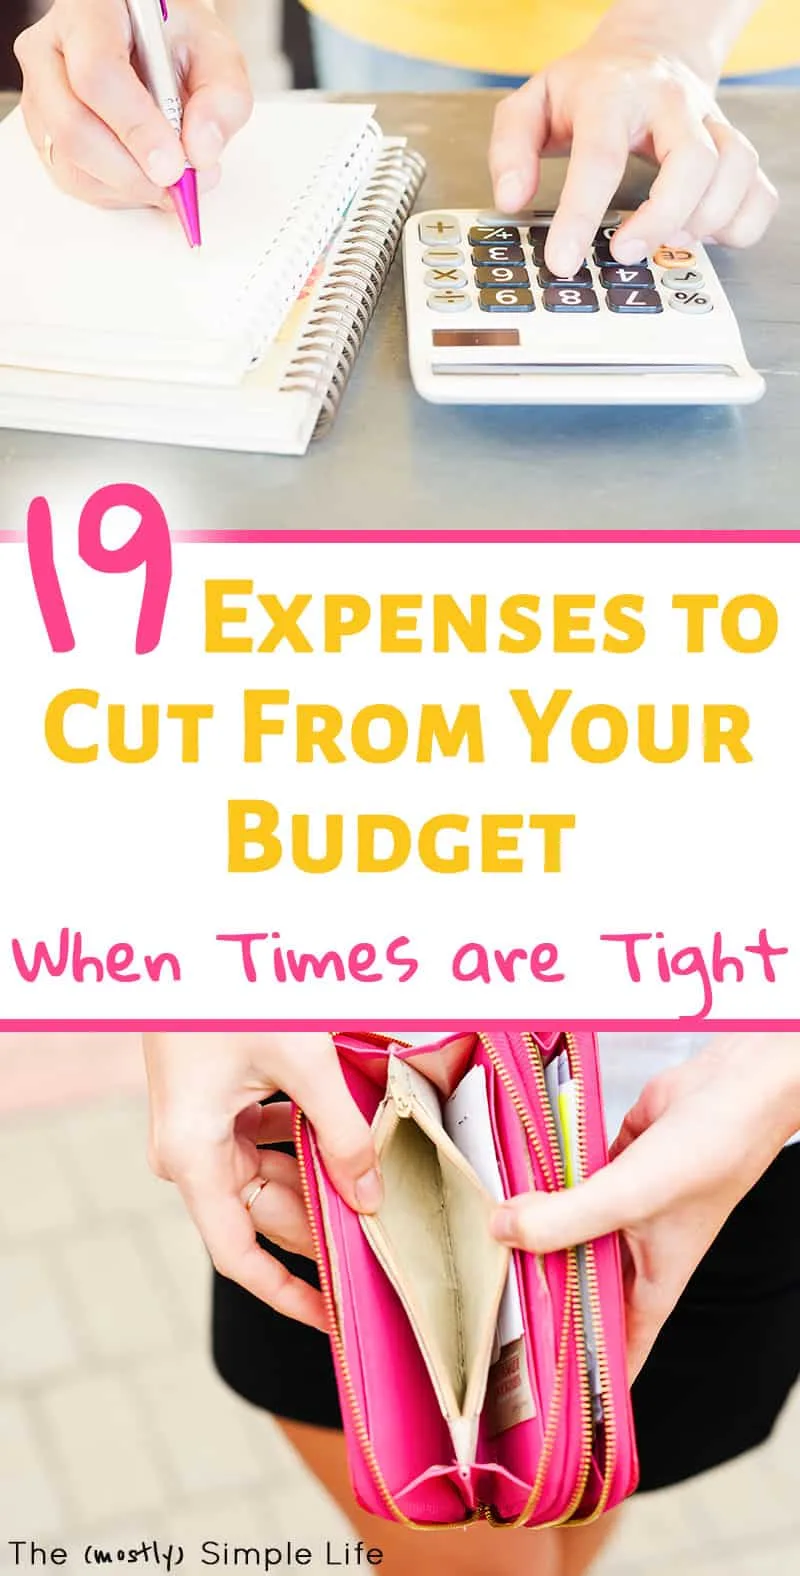 19 Expenses to Cut From Your Budget When Things are Tight